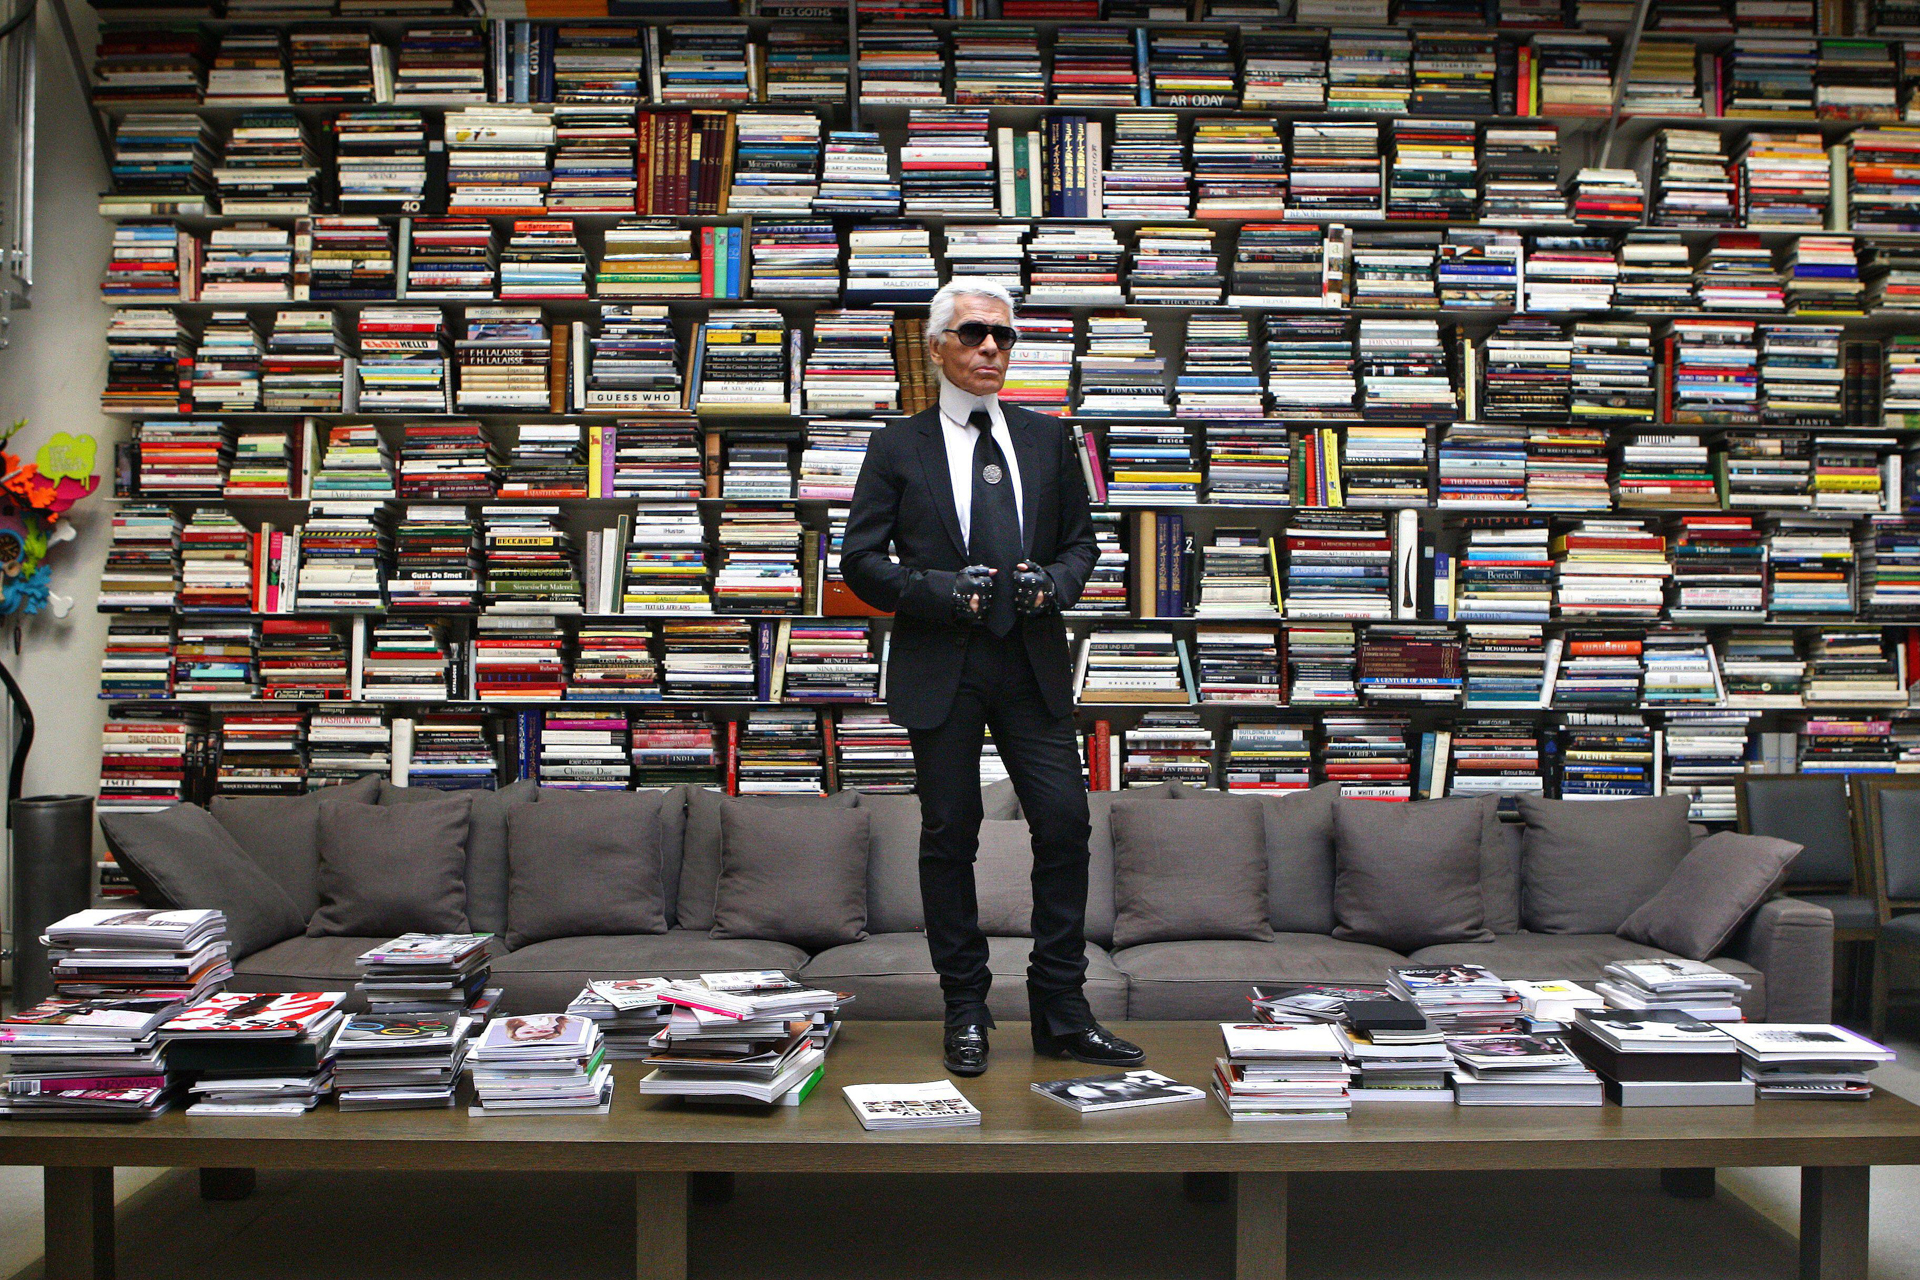 Karl Lagerfeld's Interior Design Projects Reveal His Encyclopedic Mind